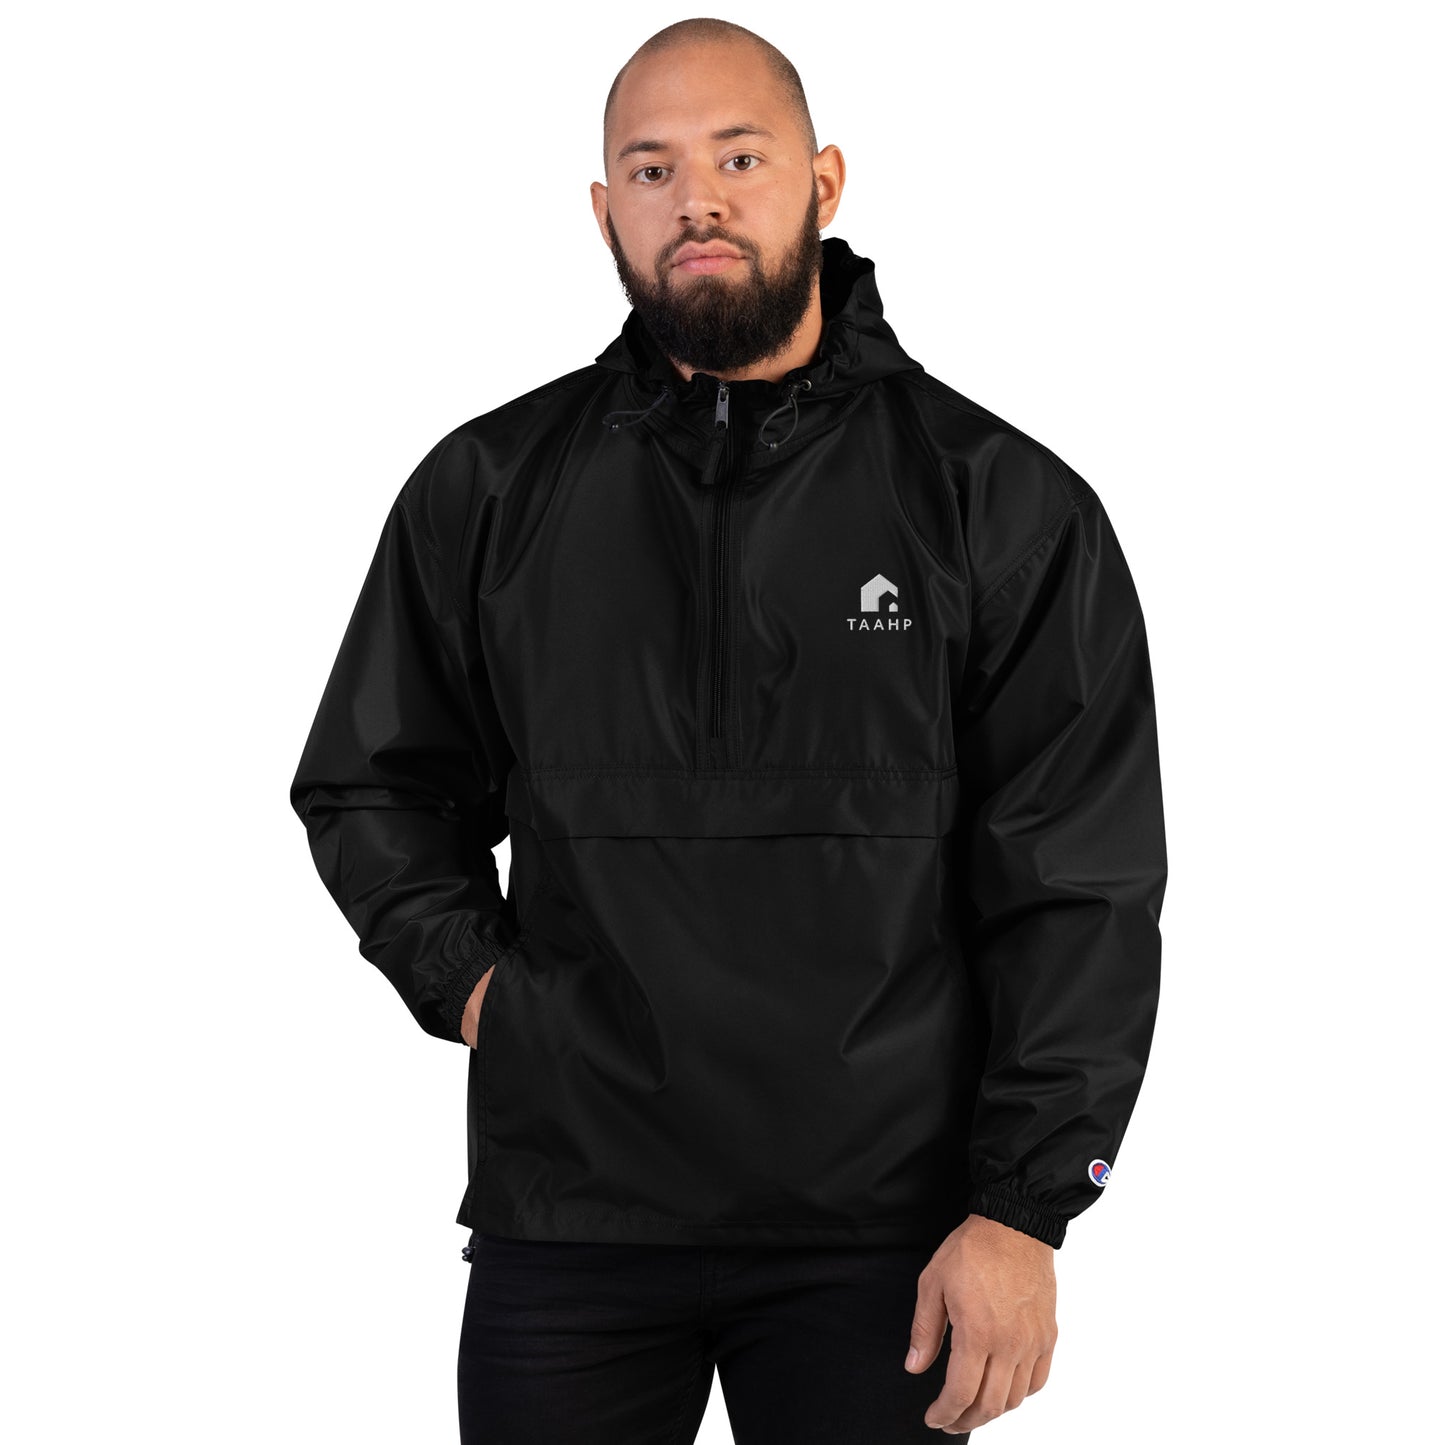 Embroidered Champion Packable Jacket - TAAHP Logo